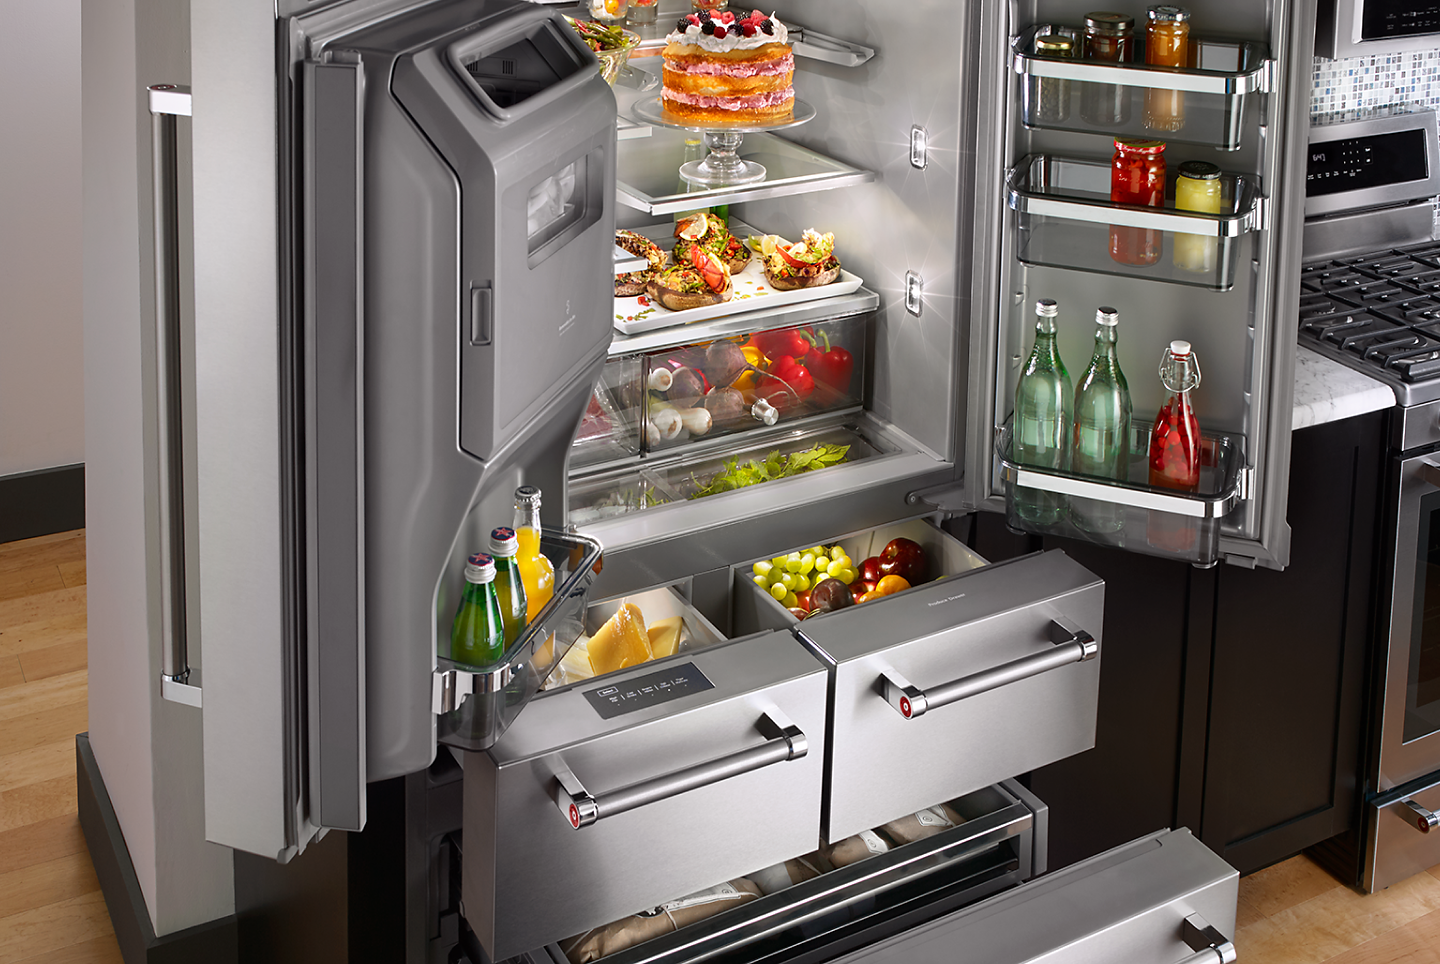 https://kitchenaid-h.assetsadobe.com/is/image/content/dam/business-unit/kitchenaid/en-us/marketing-content/site-assets/page-content/pinch-of-help/how-to-organize-your-french-door-refrigerator/HTOYFDR-image1-d.png?fmt=png-alpha&qlt=85,0&resMode=sharp2&op_usm=1.75,0.3,2,0&scl=1&constrain=fit,1